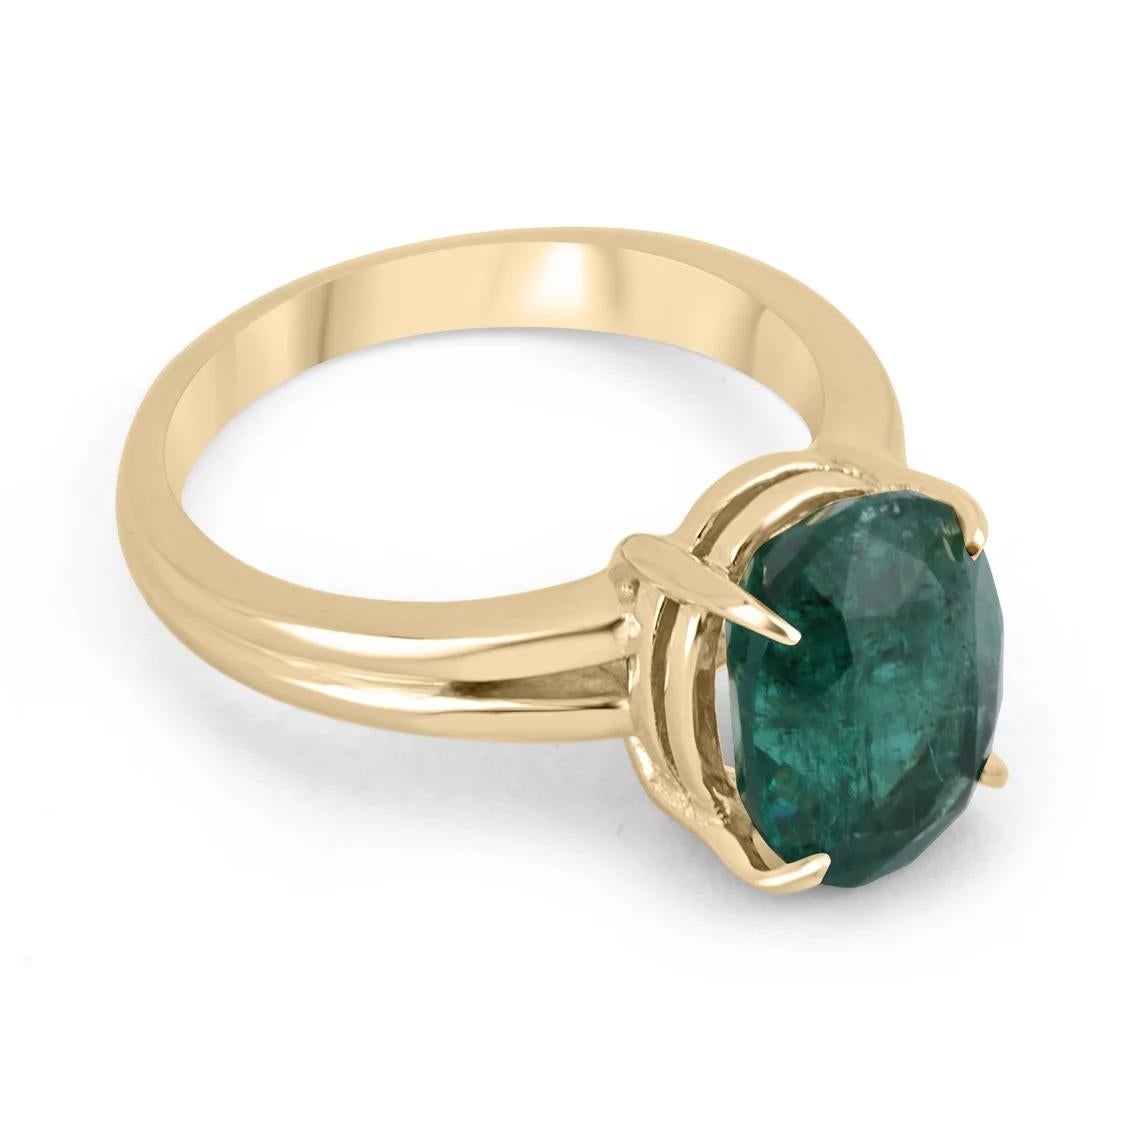 A stunning, solitaire, natural emerald ring. Enthrall in this gorgeous piece, as it displays a lively oval cut natural Zambian emerald with a desirable dark forest green color and excellent luster as some of its many remarkable characteristics. Set